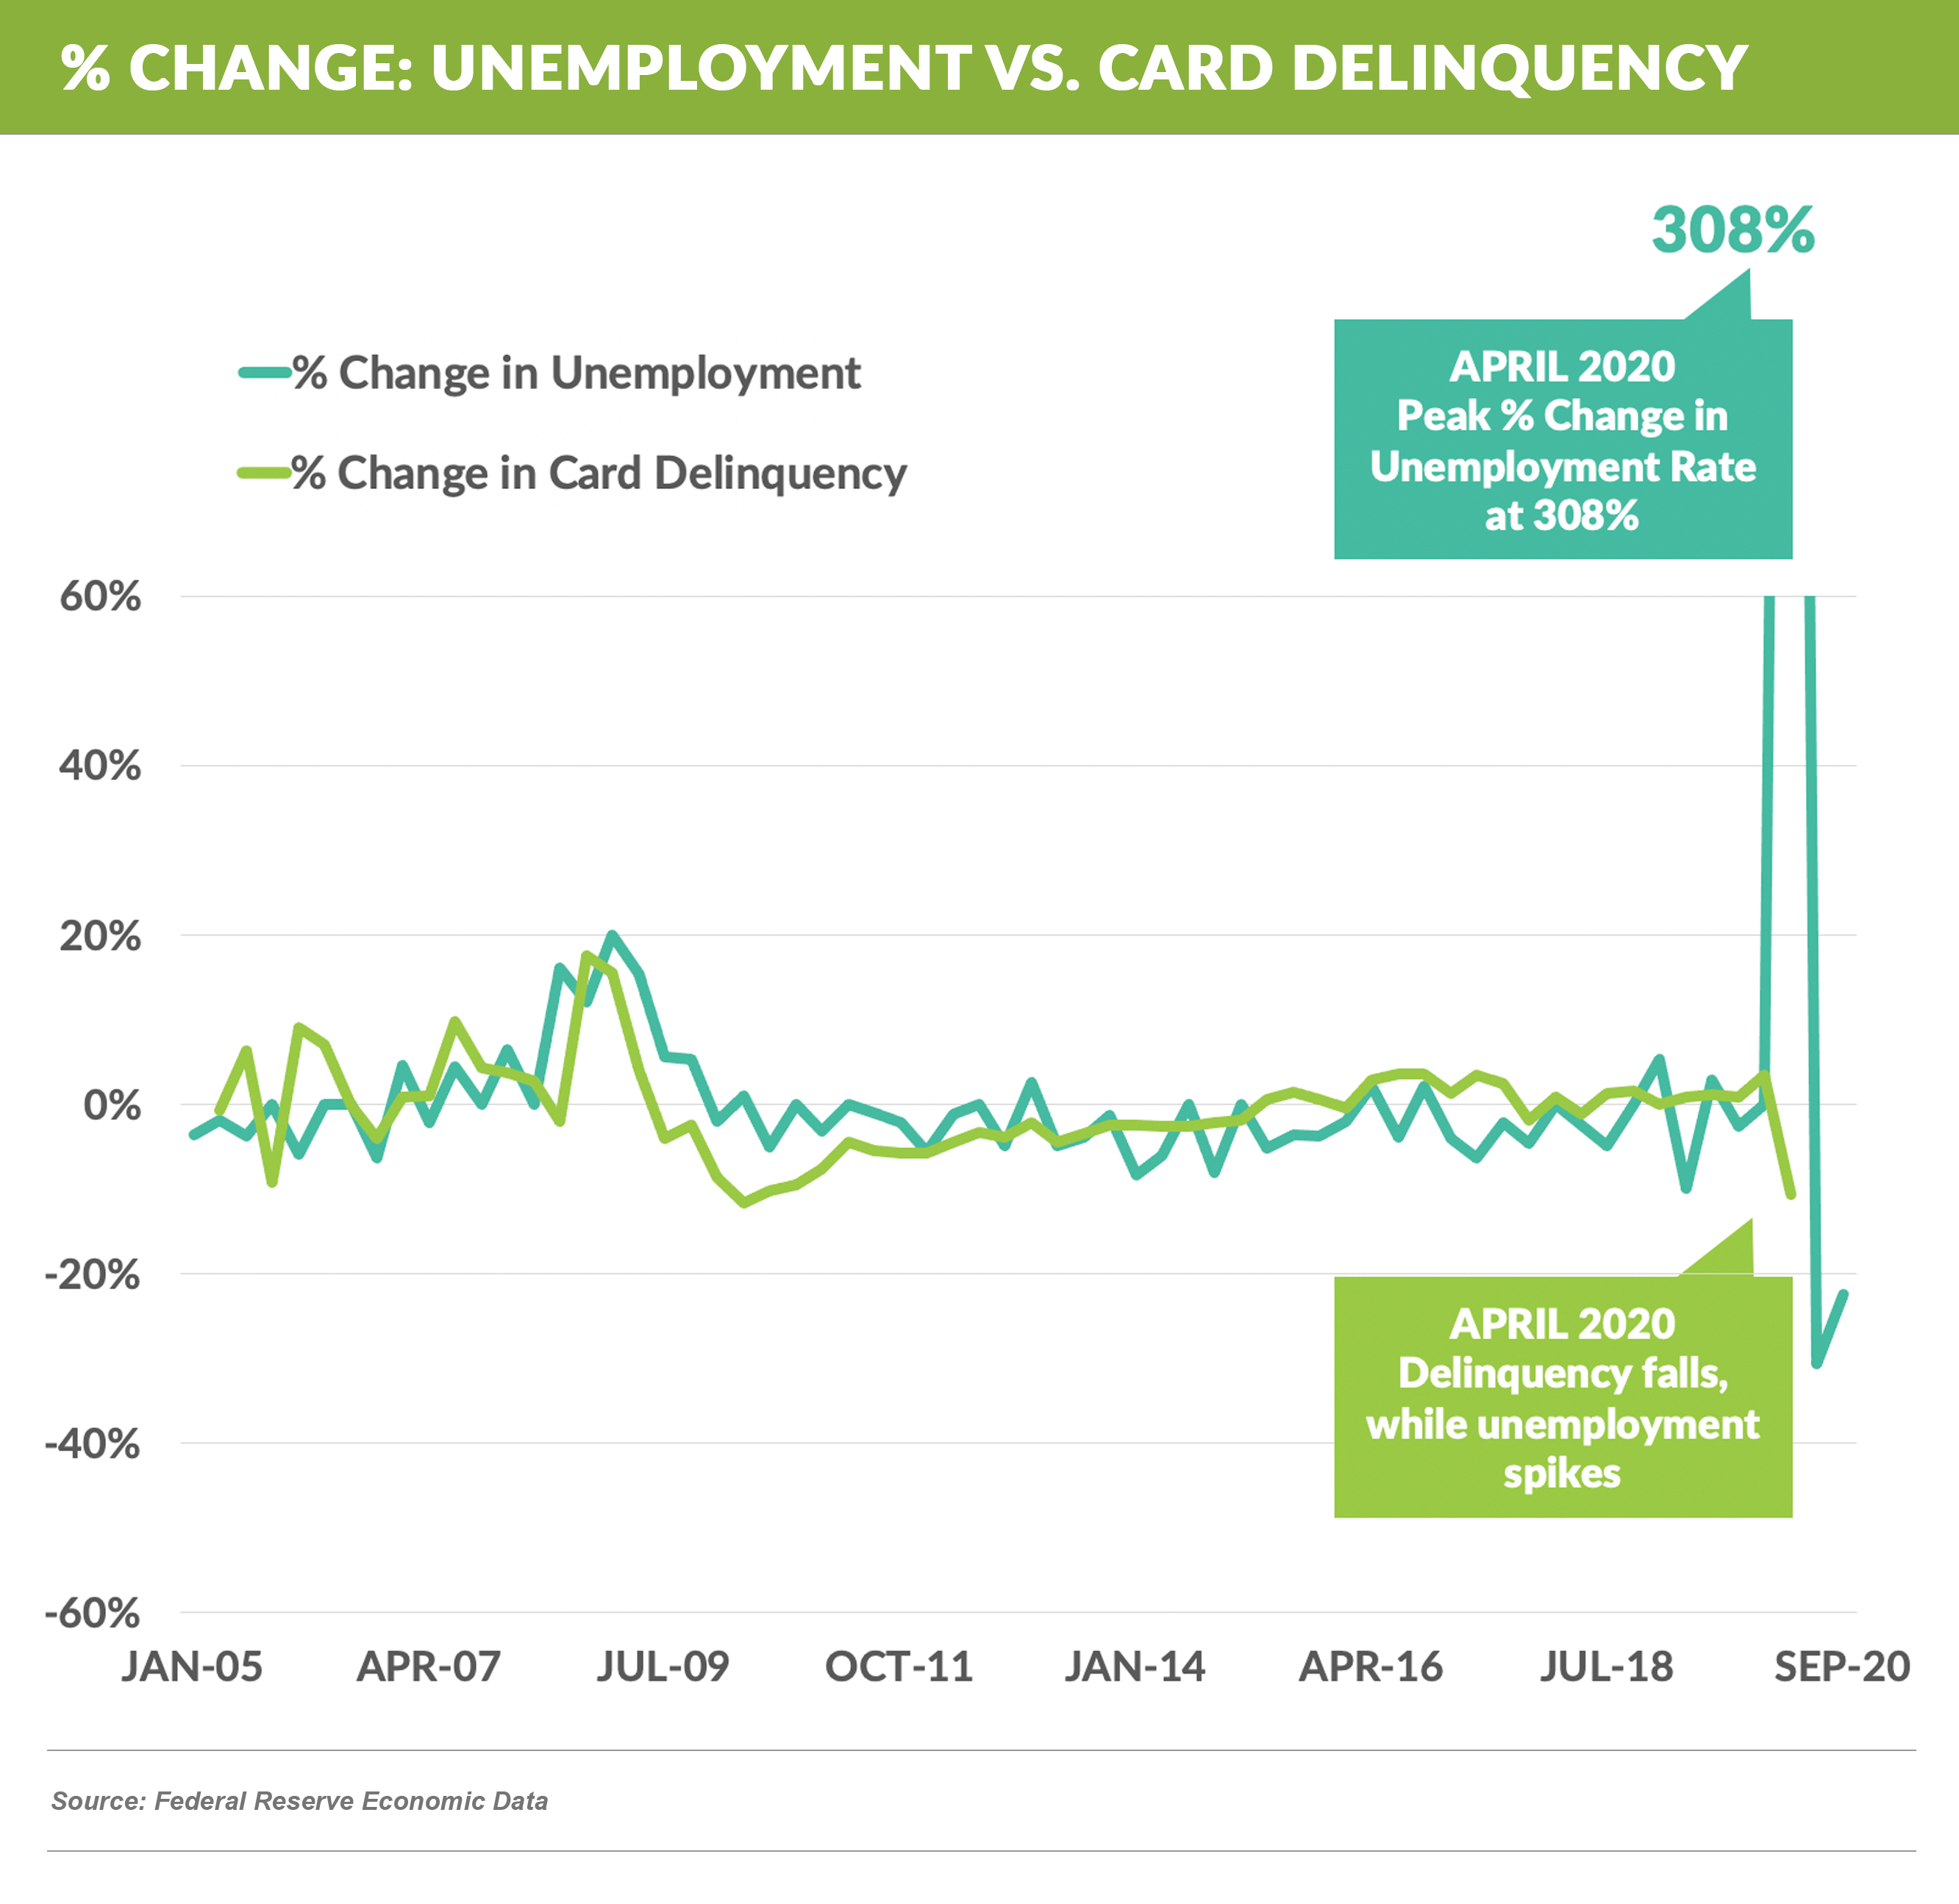 % Change in Unemployment VS Card Delinquency